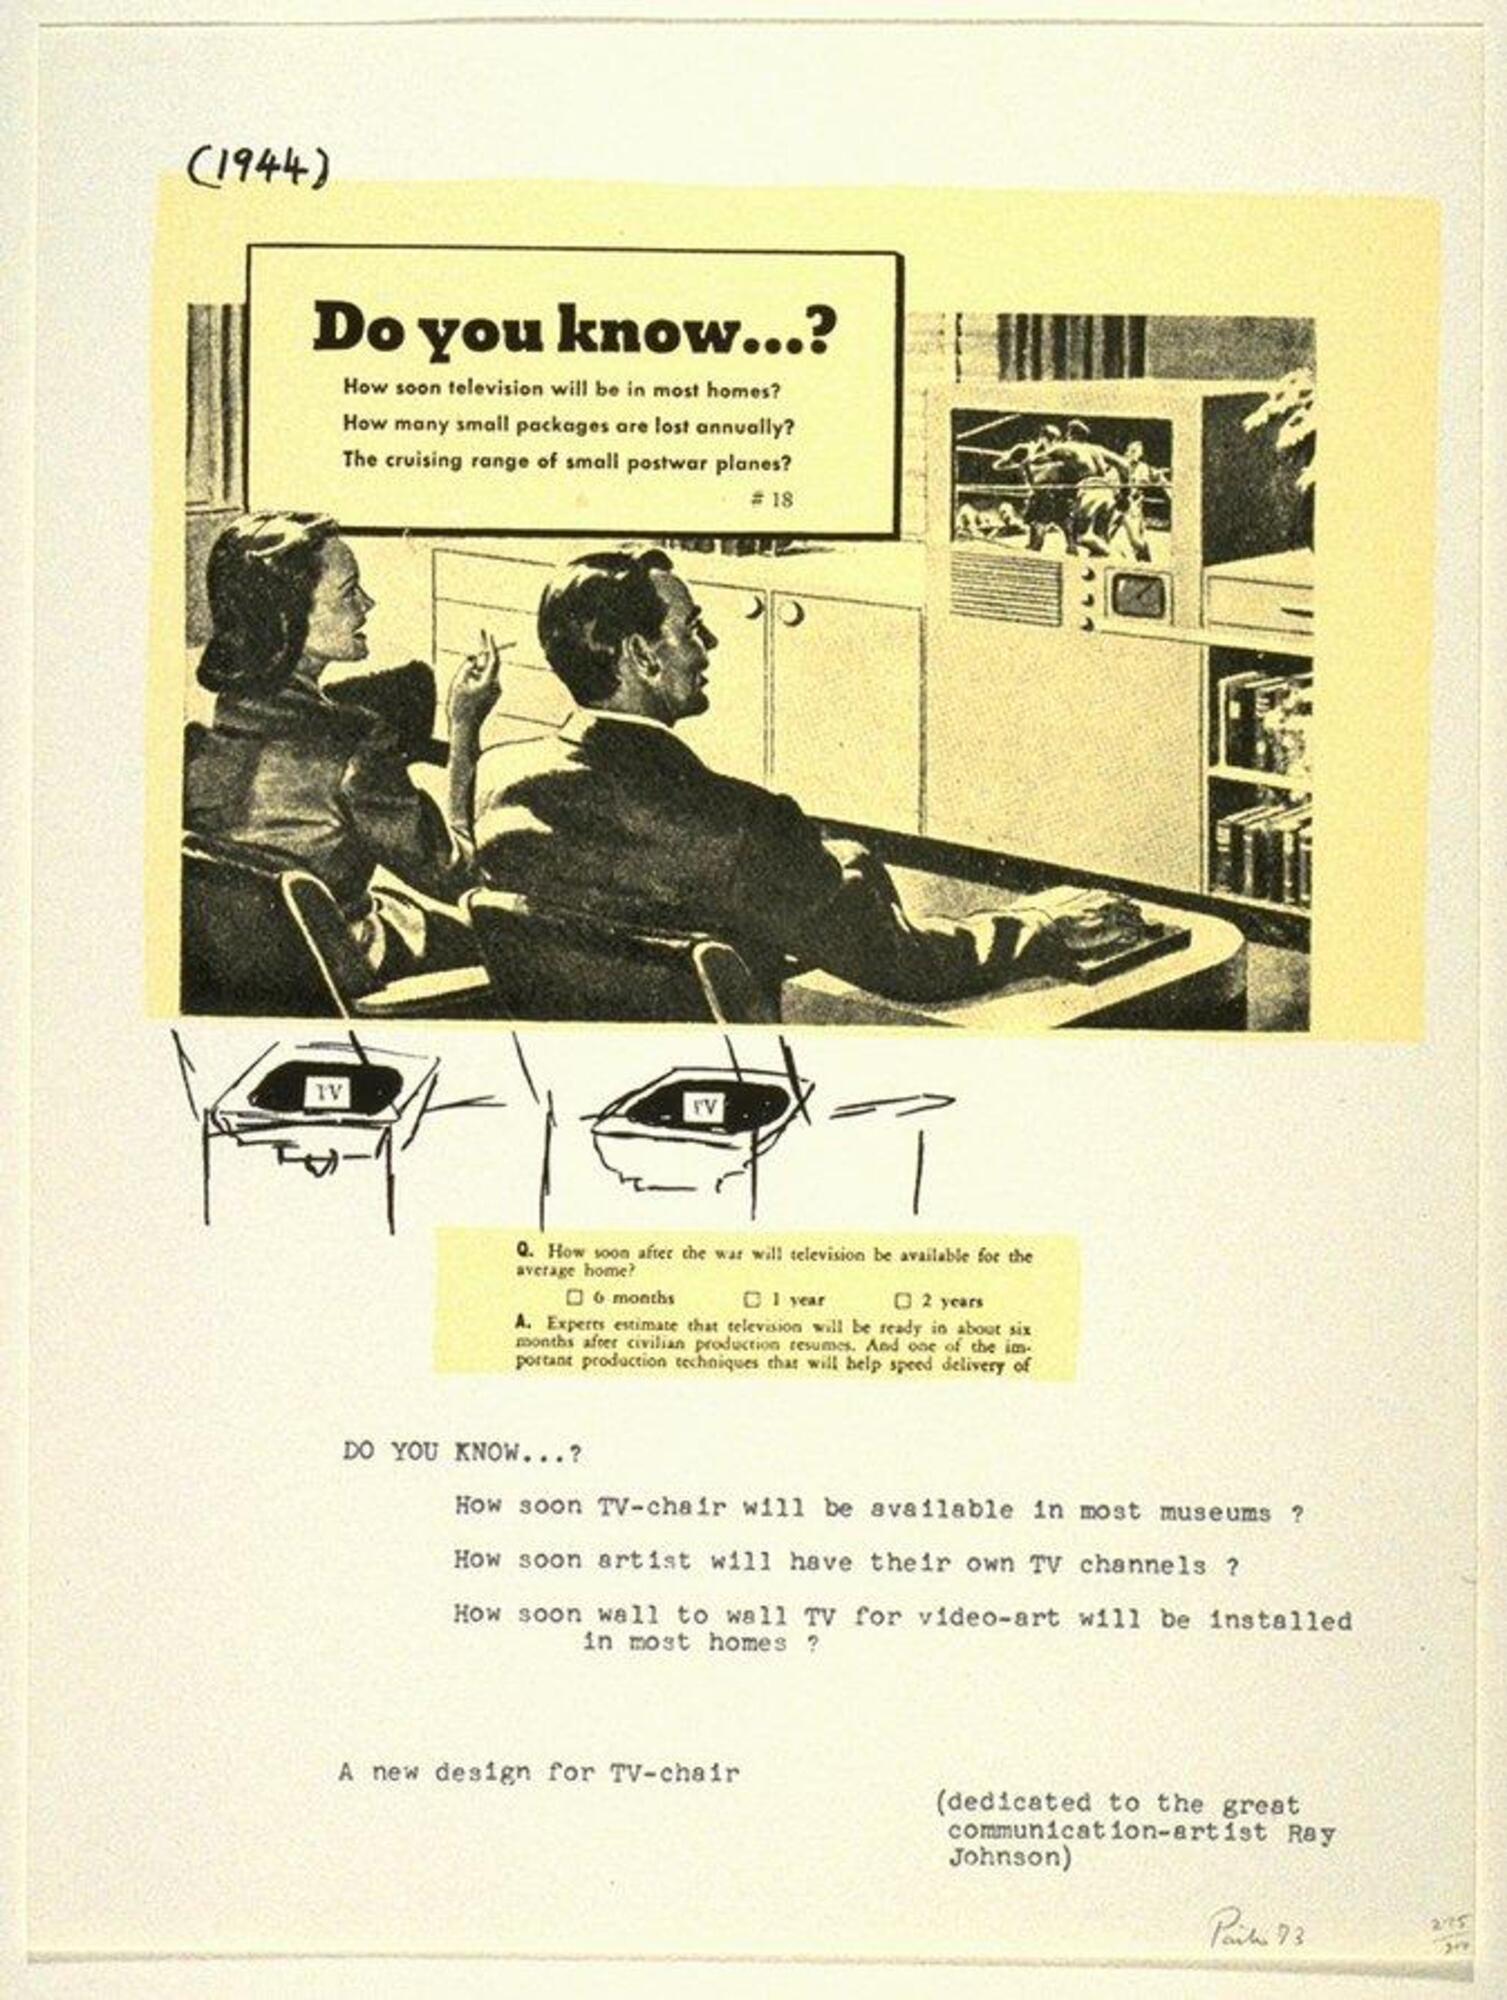 This vertical print shows a slick advertising image in the top half with a man and a woman watching an early model television set. The woman is smoking a cigarette. A text box is inserted asking three questions. The bottom half is less slick, simply a diagram and text, some of it in a typewriter font. Text above and below asks about how soon television sets will be widely available in homes and museums. The date 1944 is included in parentheses at the top of the image.